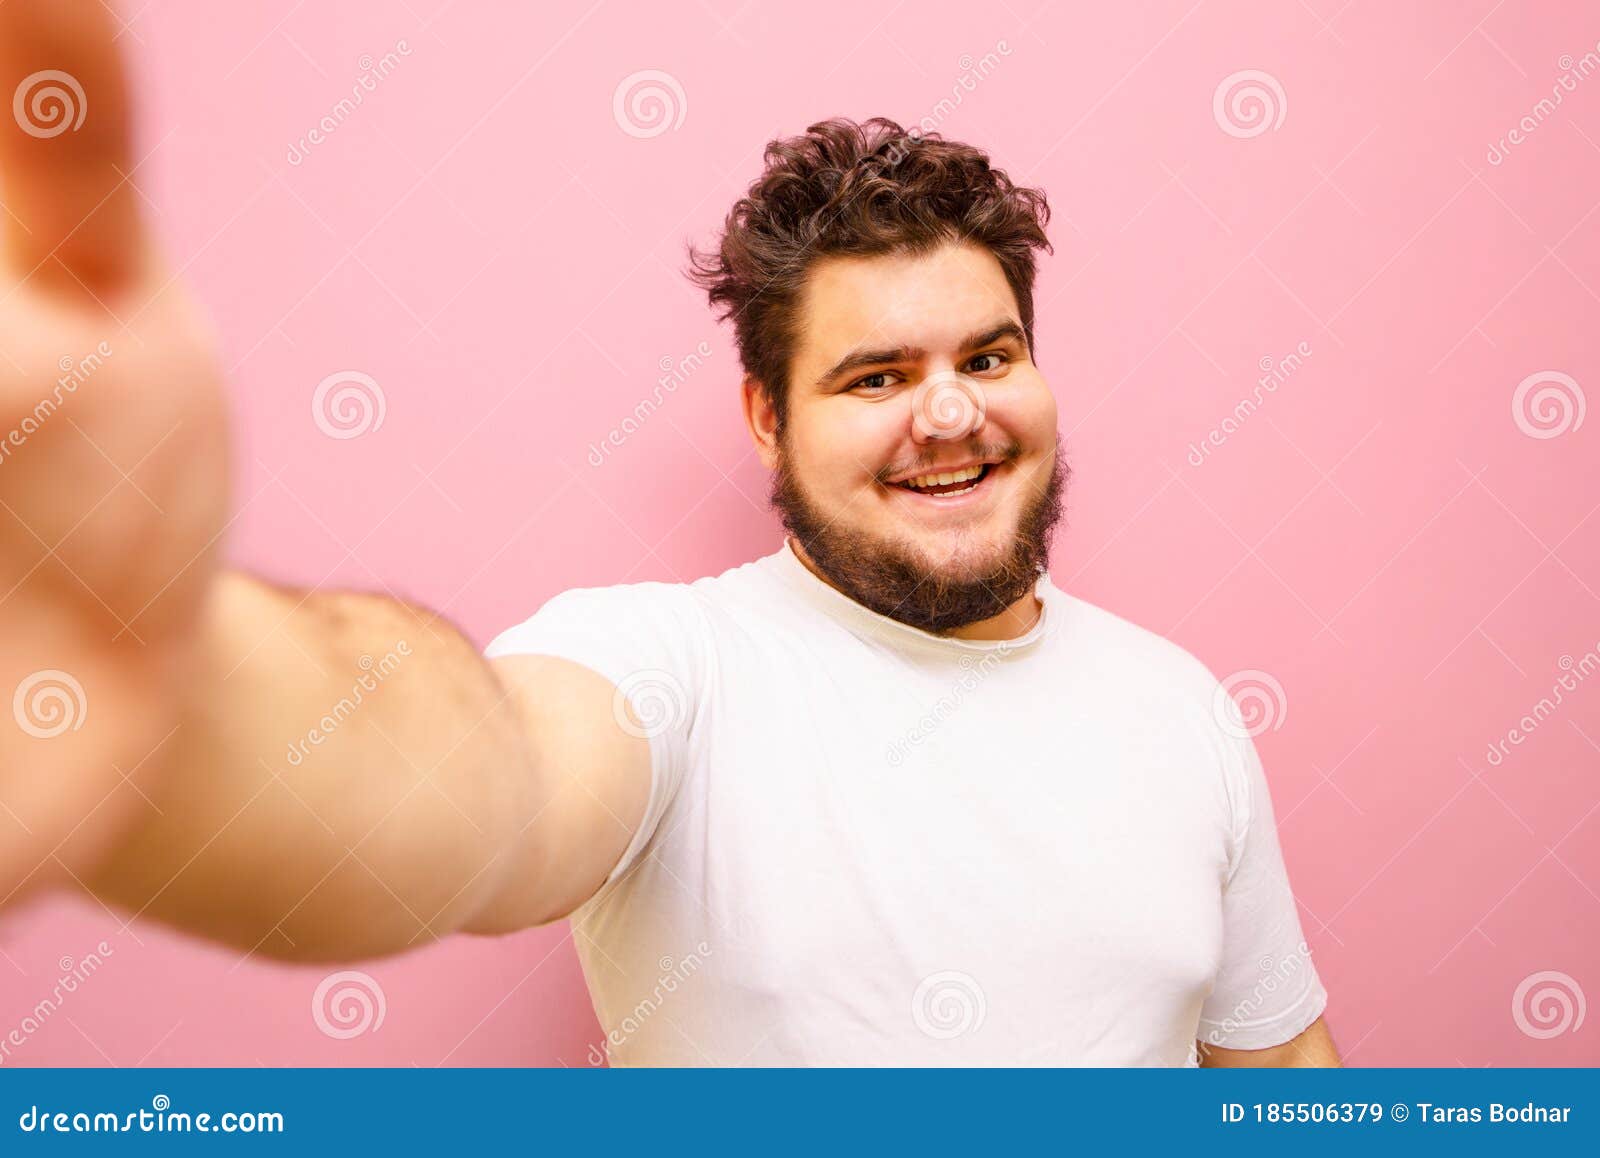 Happy Overweight Man Taking Selfie on Pink Background, Looking into Camera  and Smiling. Funny Fat Man Taking His Photo on Camera Stock Image - Image  of copy, friendly: 185506379